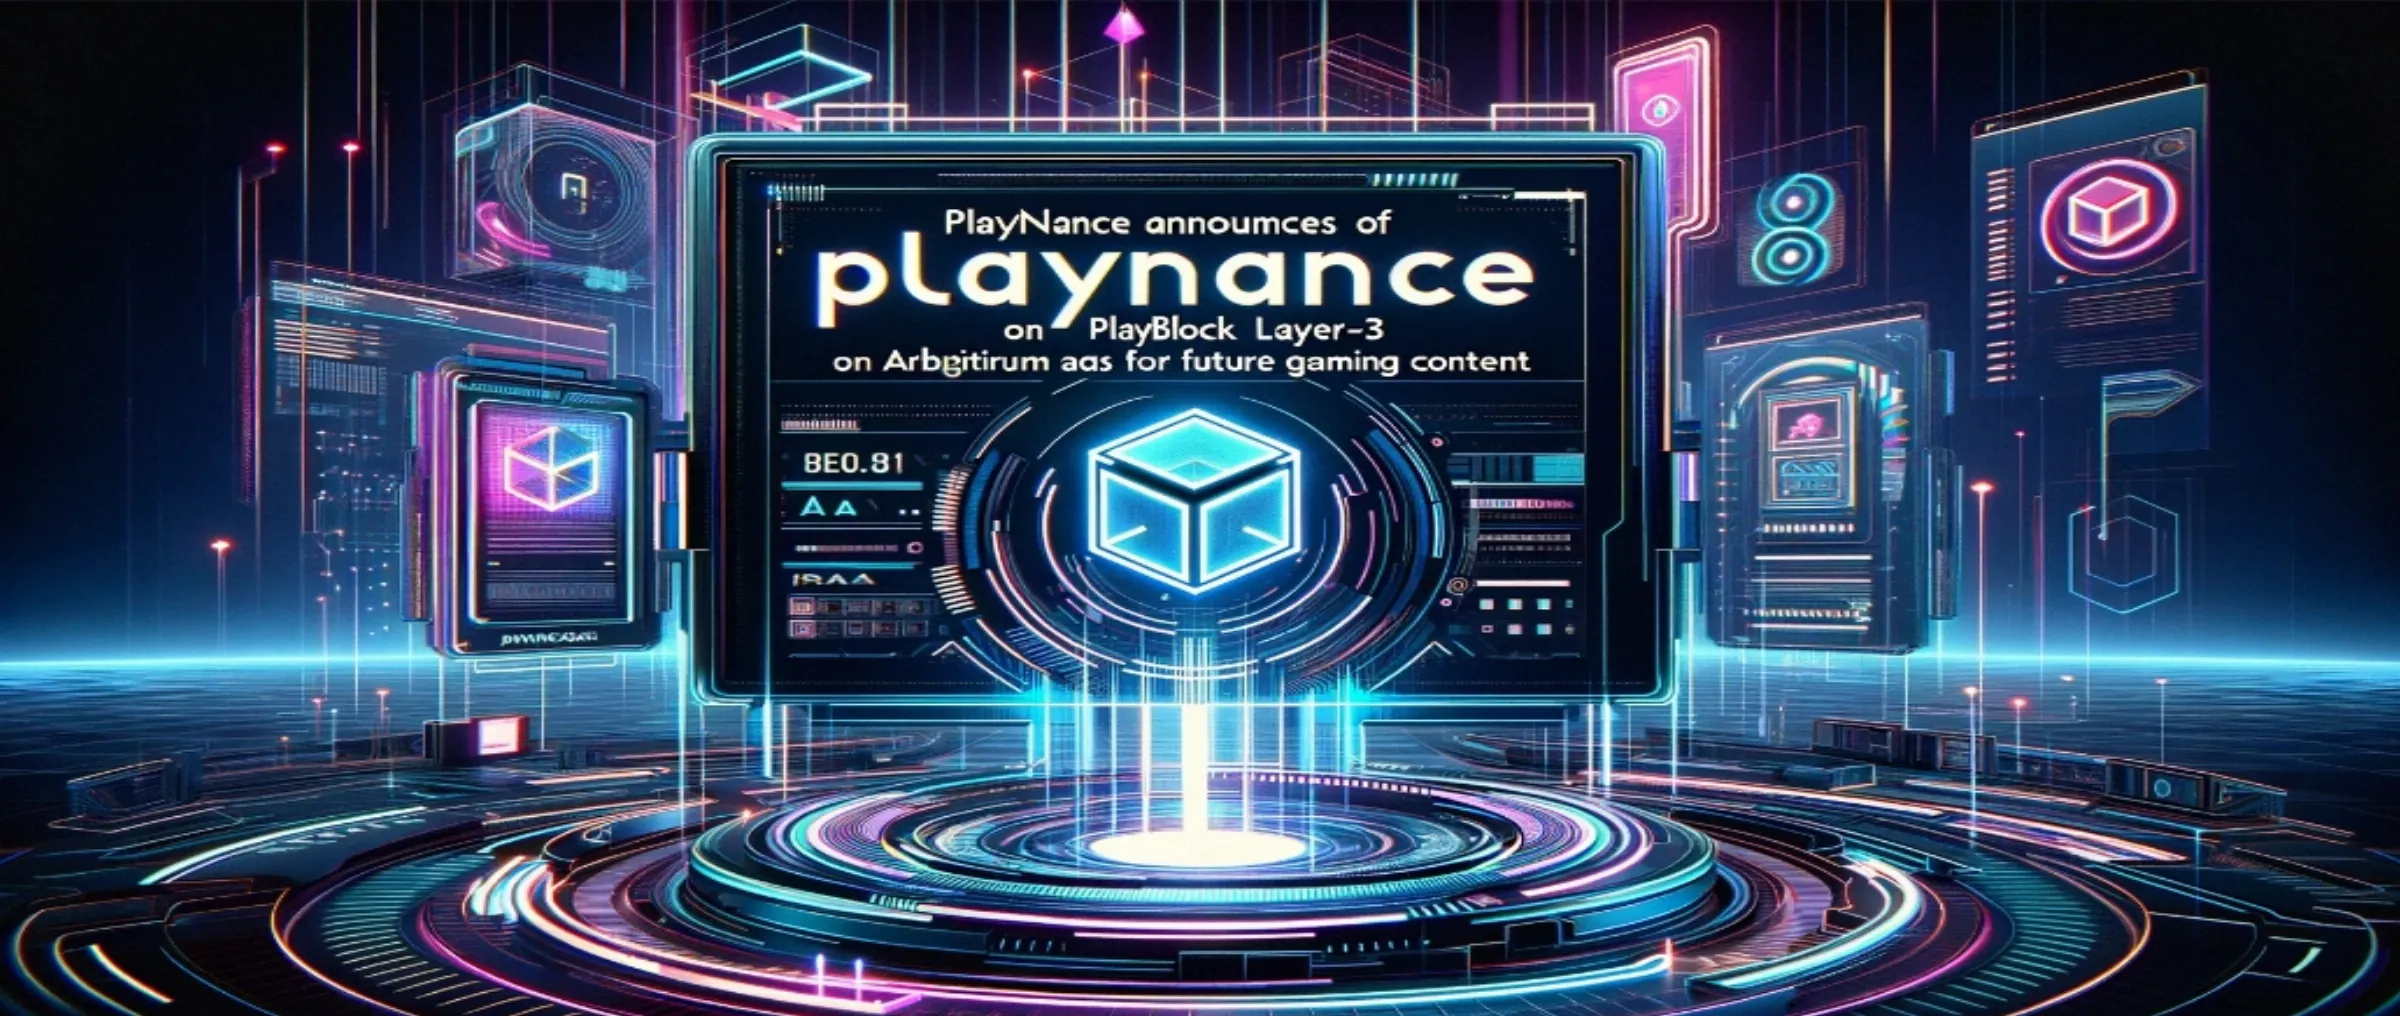 Playnance Announces the launch of PlayBlock Layer-3 on Arbitrum using Gelato RaaS for Future Game Content